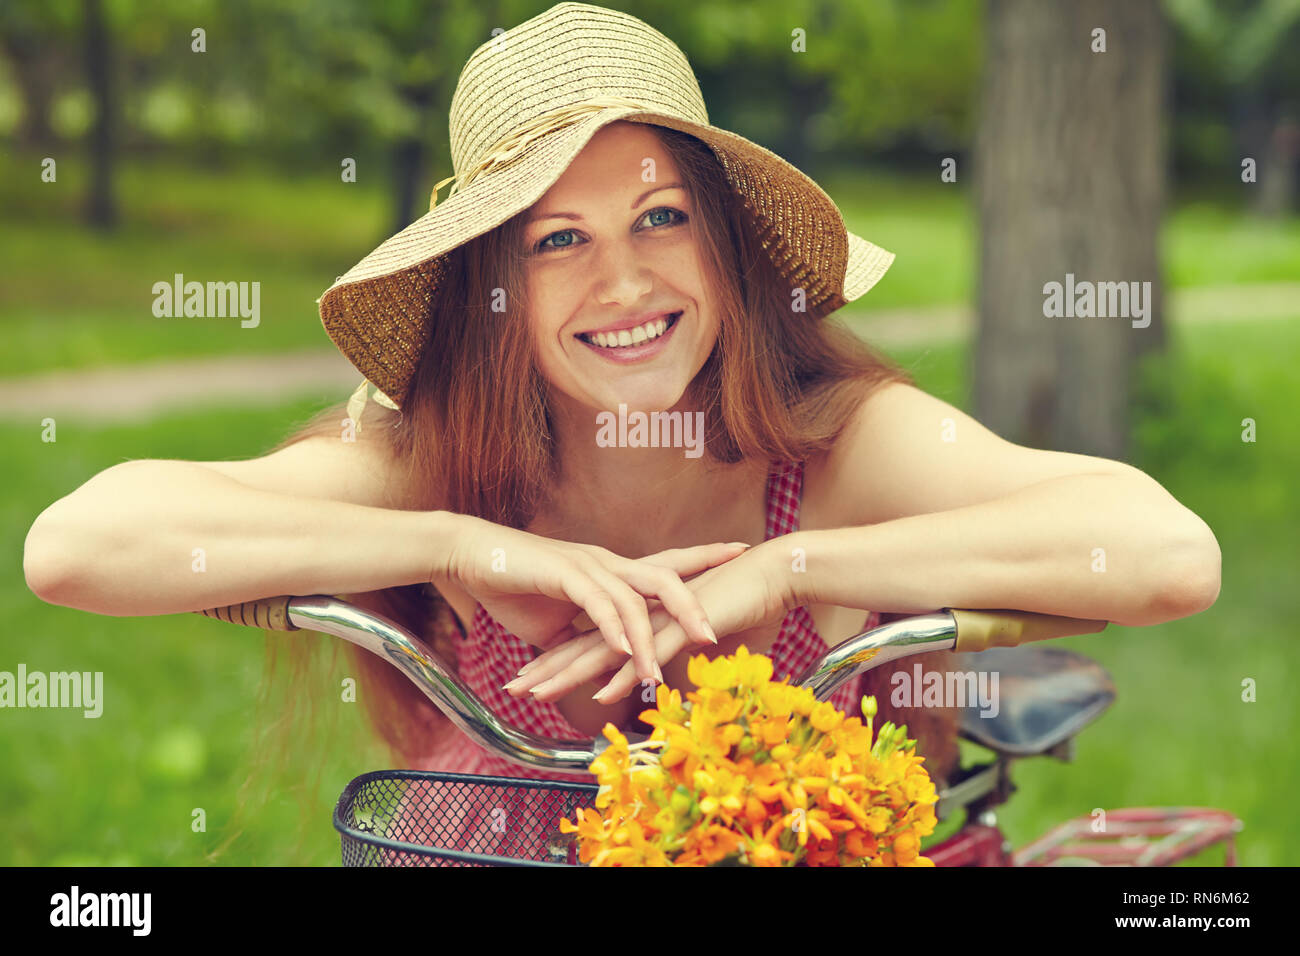 young woman in a dress and hat with a bike with flowers in a basket in a summer park Stock Photo